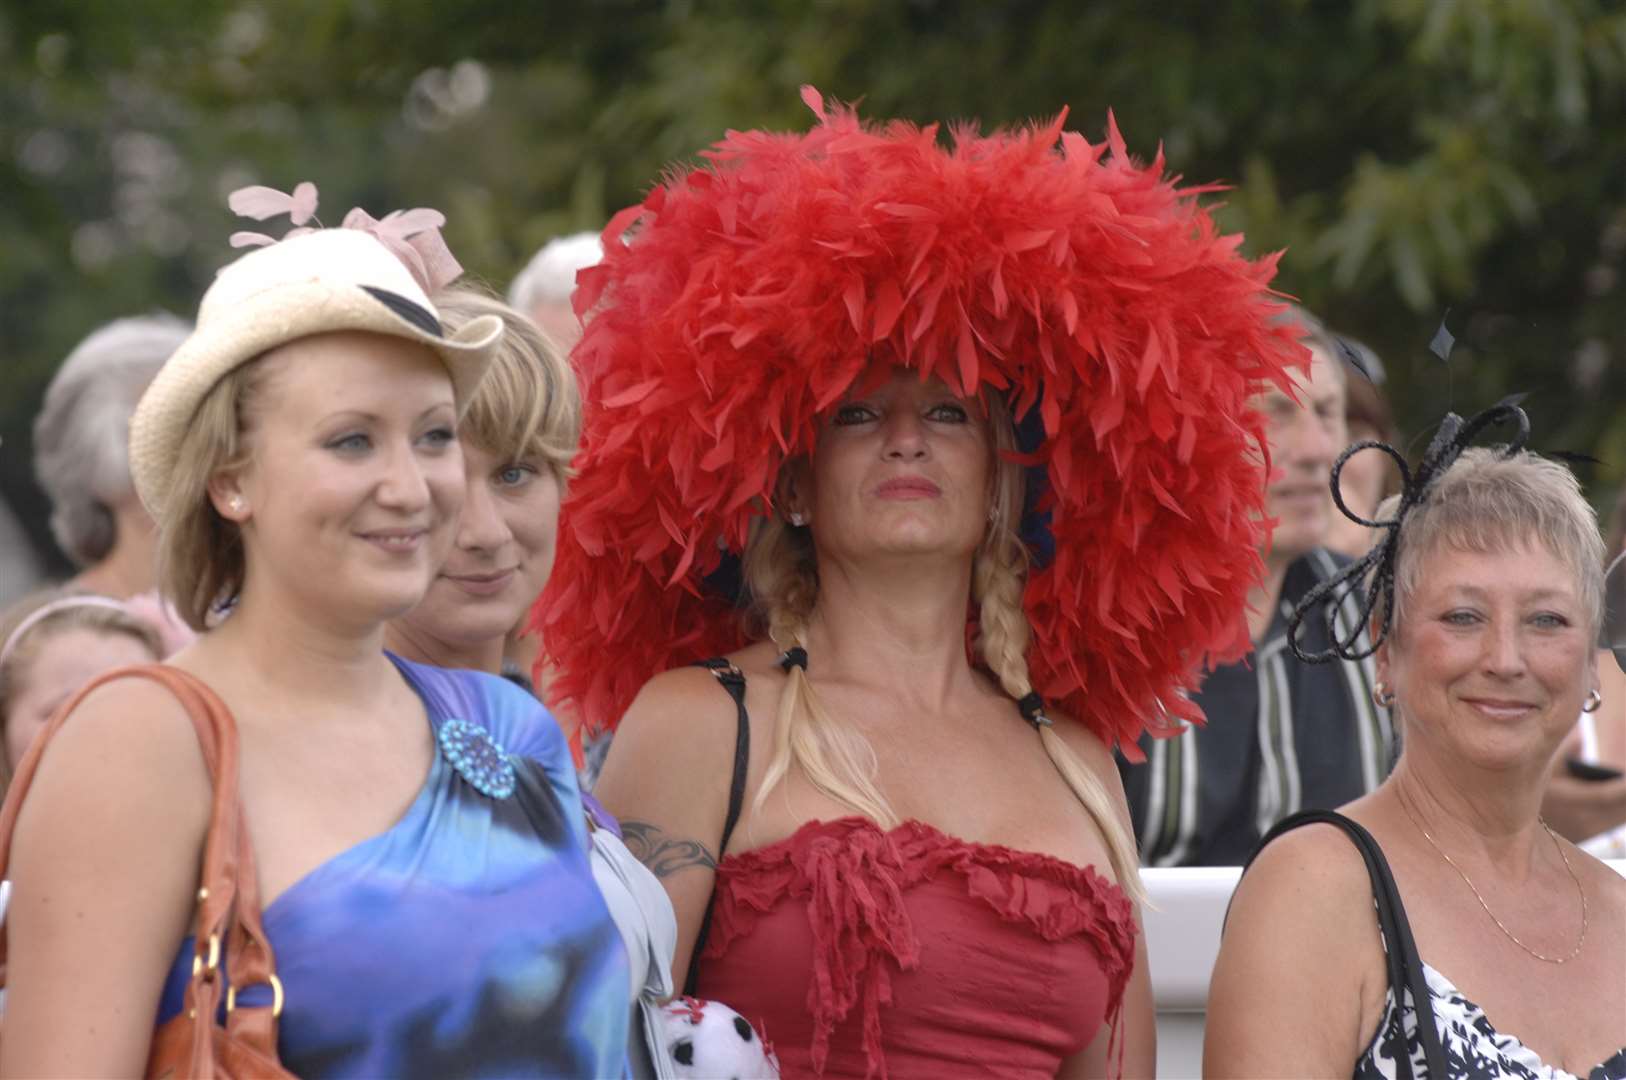 Hats on show at Folkestone kmfm race day in August 2009